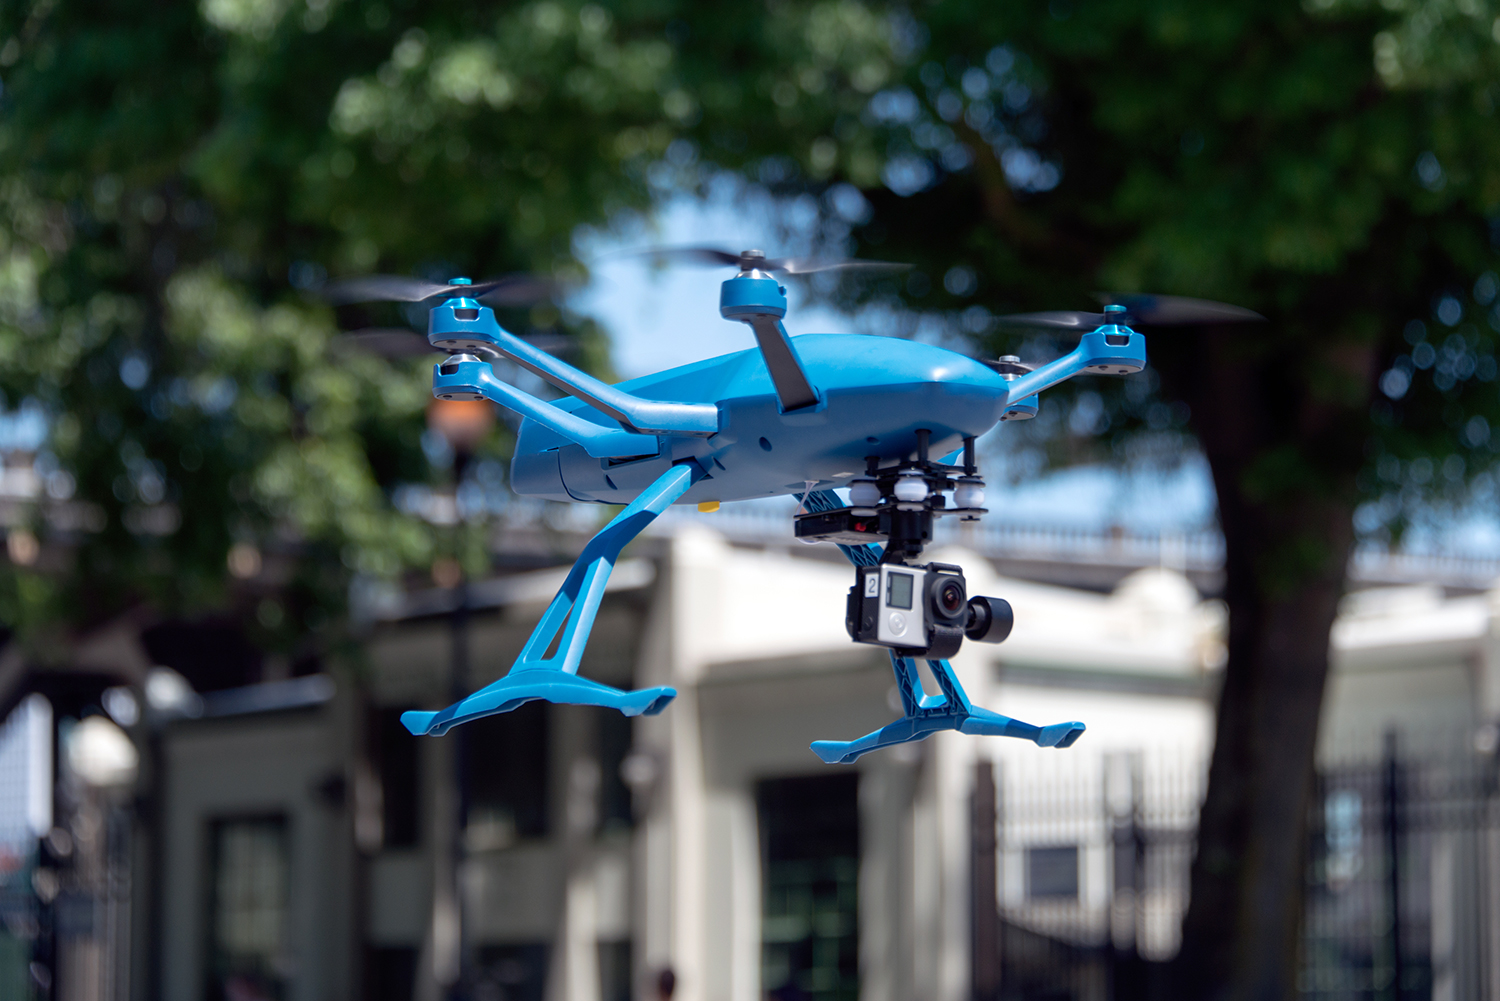 The Hexo+ is designed to follow you, but we wish it would just fly away